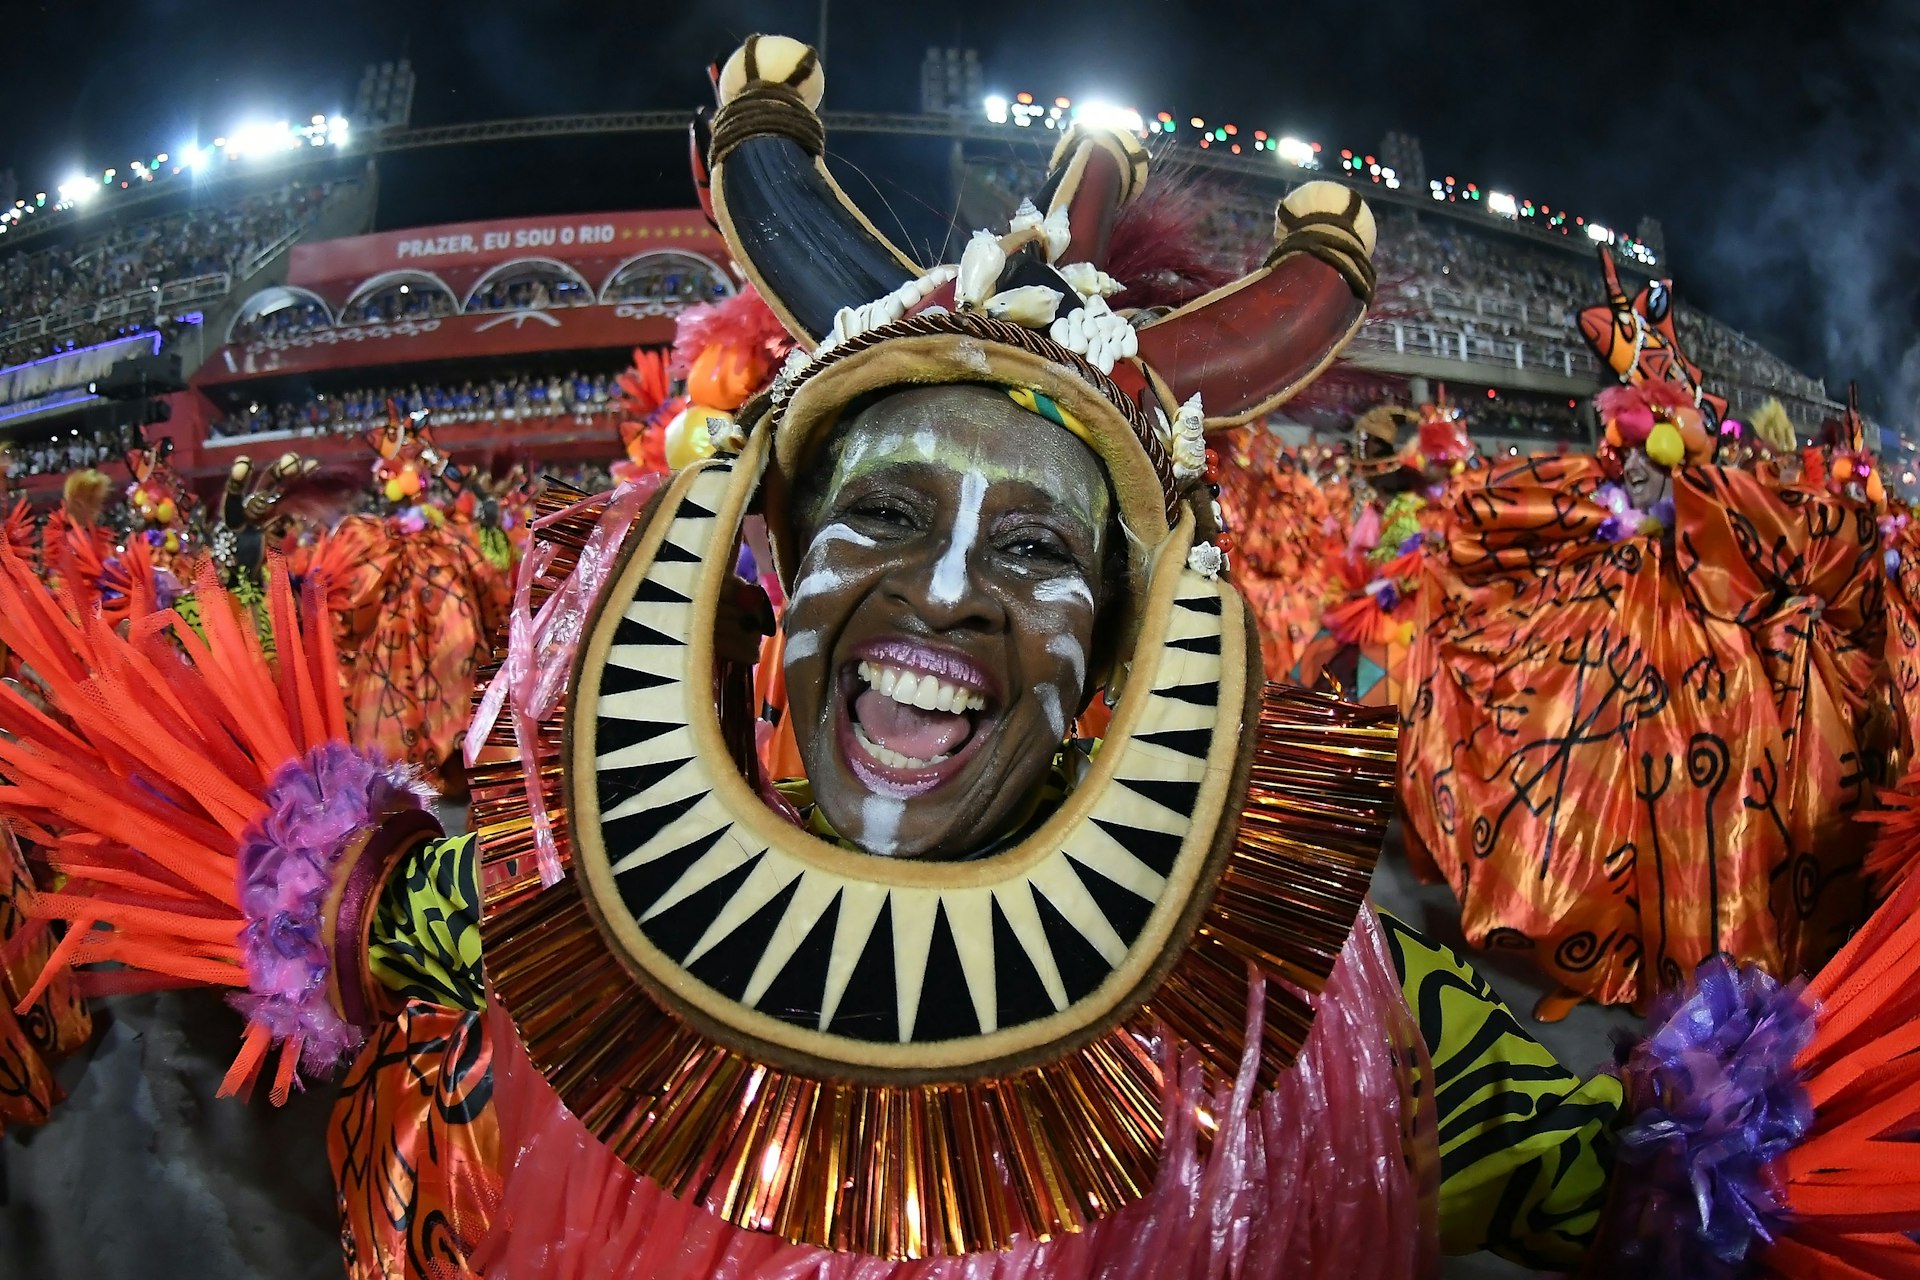 A joyous dancer at the Rio Carnival wears an elaborate tribal-themed costume with a large circular headpiece, laughing heartily during a night parade.